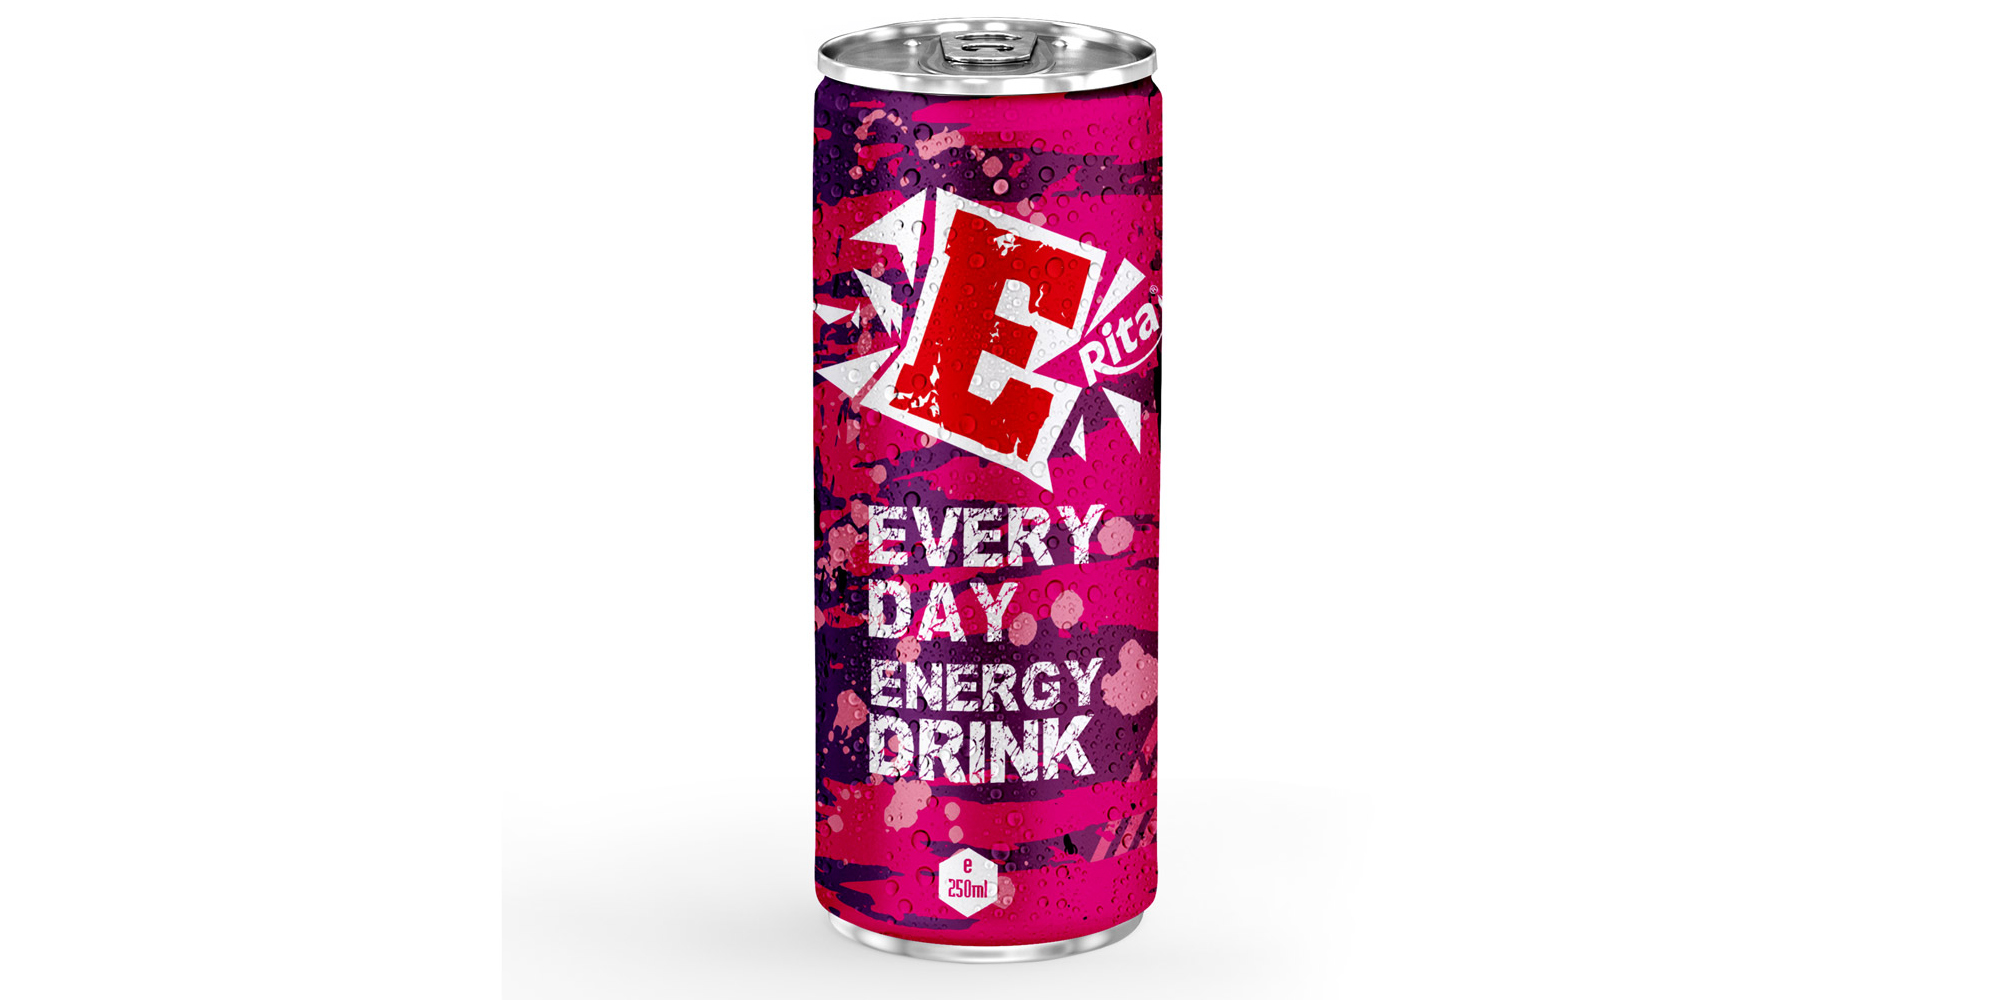 Energy drink 250ml aluminum canned  3 from RITA US